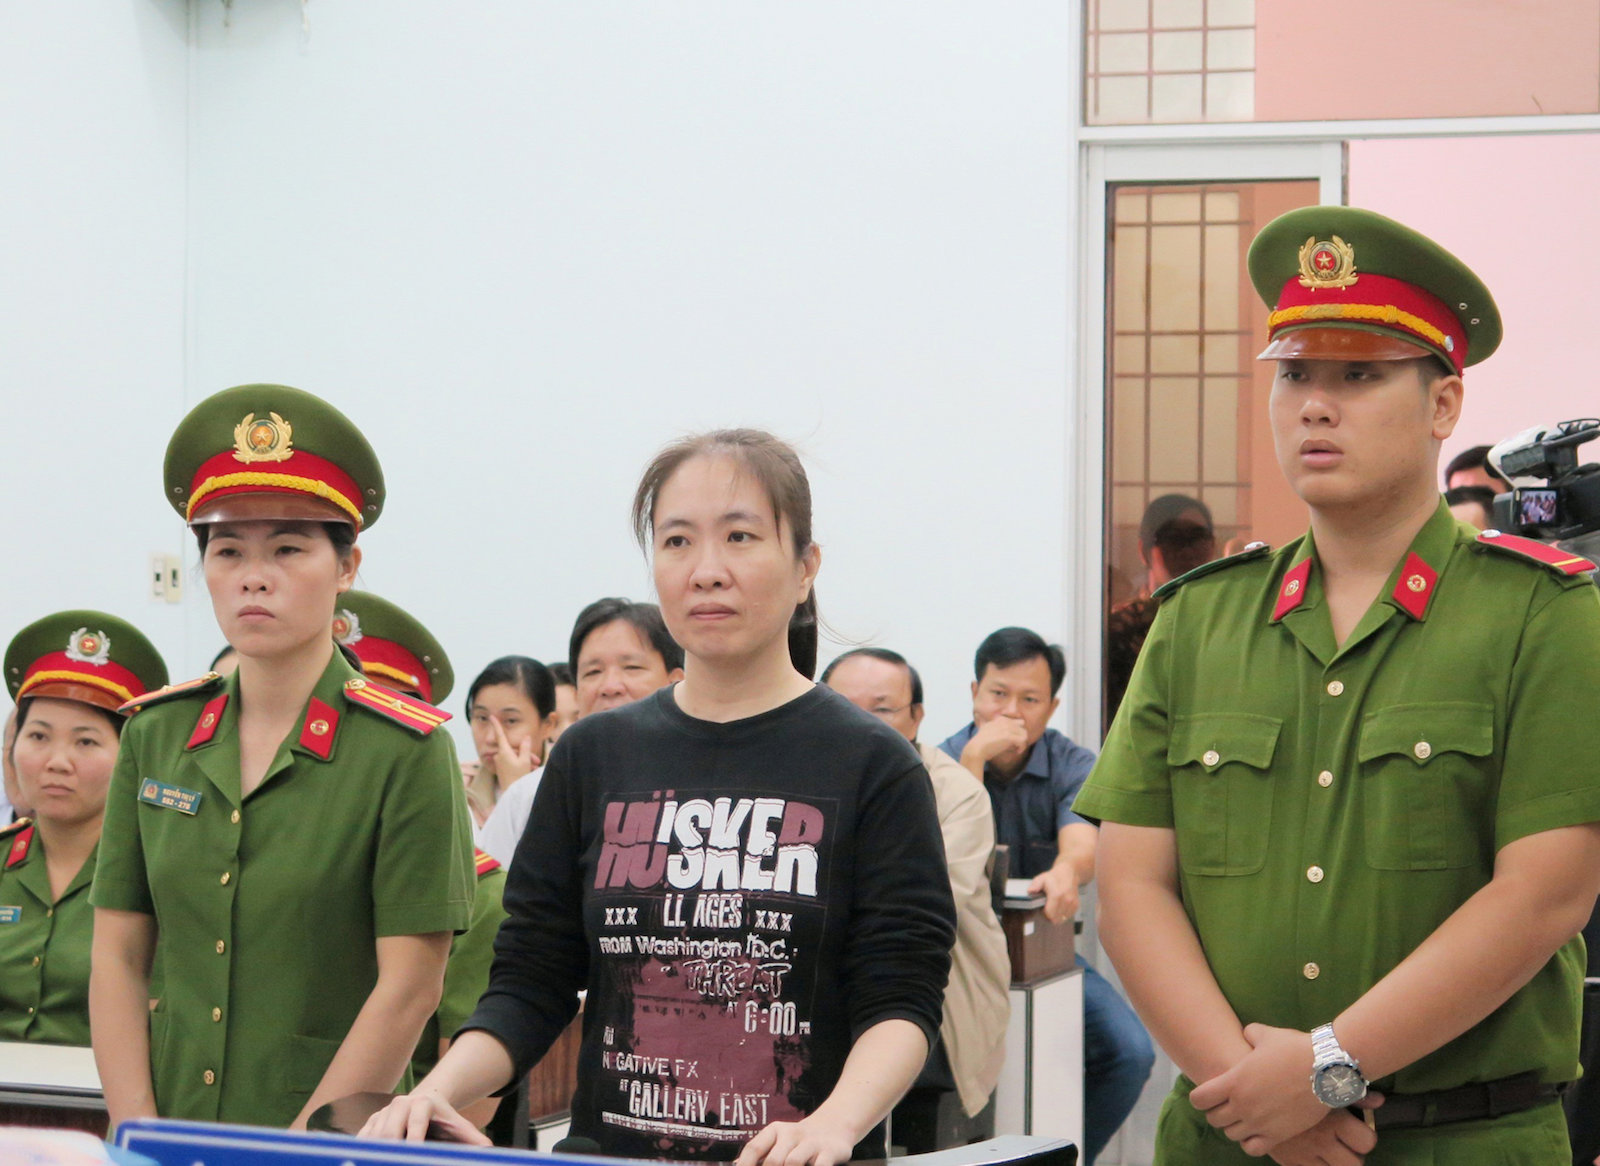 Prominent blogger Nguyen Ngoc Nhu Quynh stands between police in the dock during her appeal trial in Nha Trang resort city